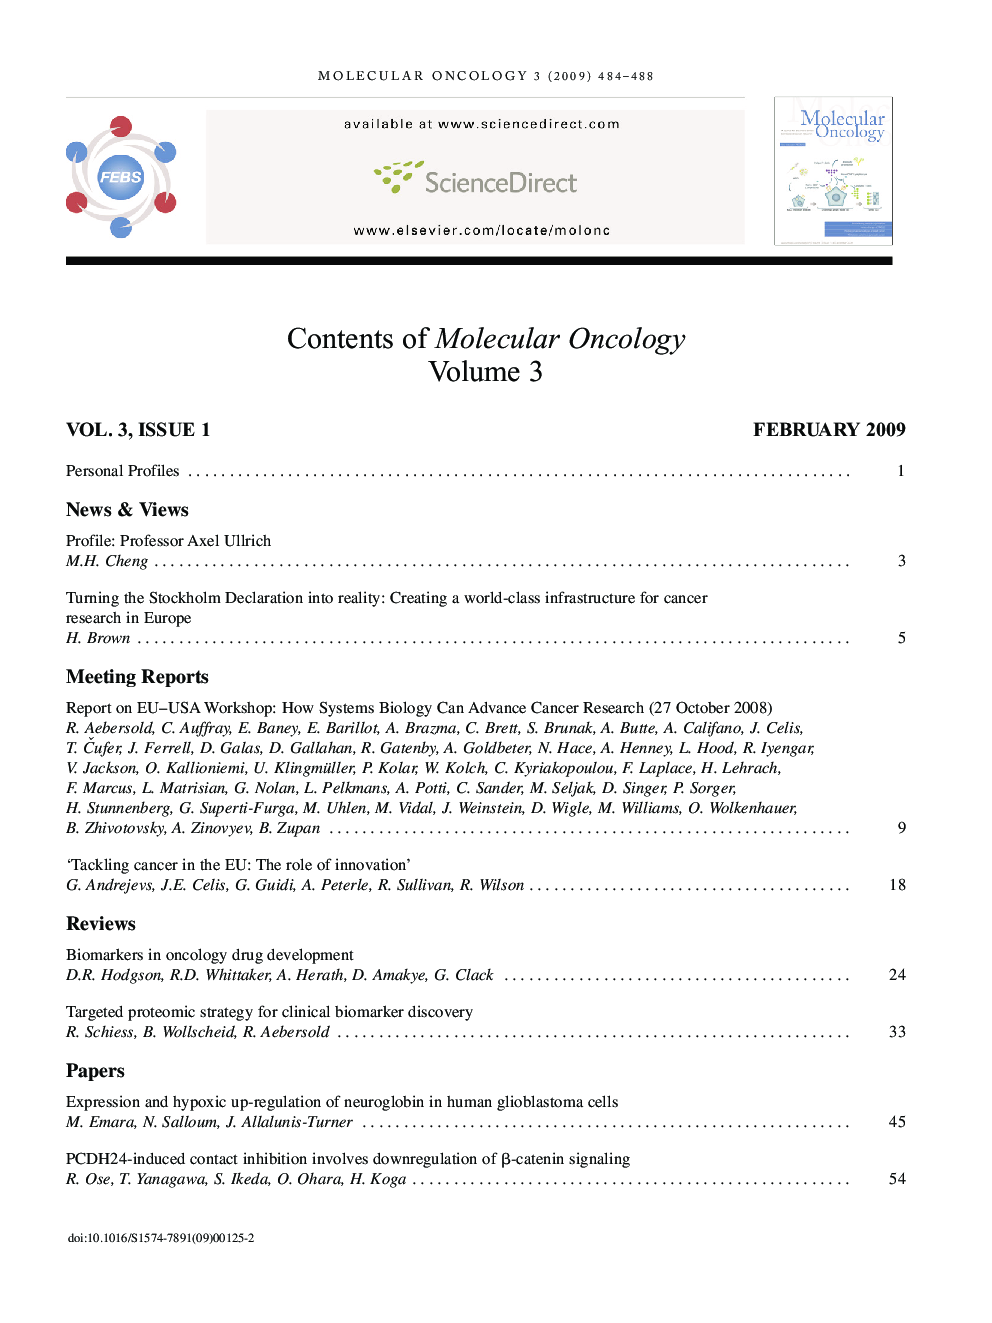 Contents of Molecular Oncology Volume 3